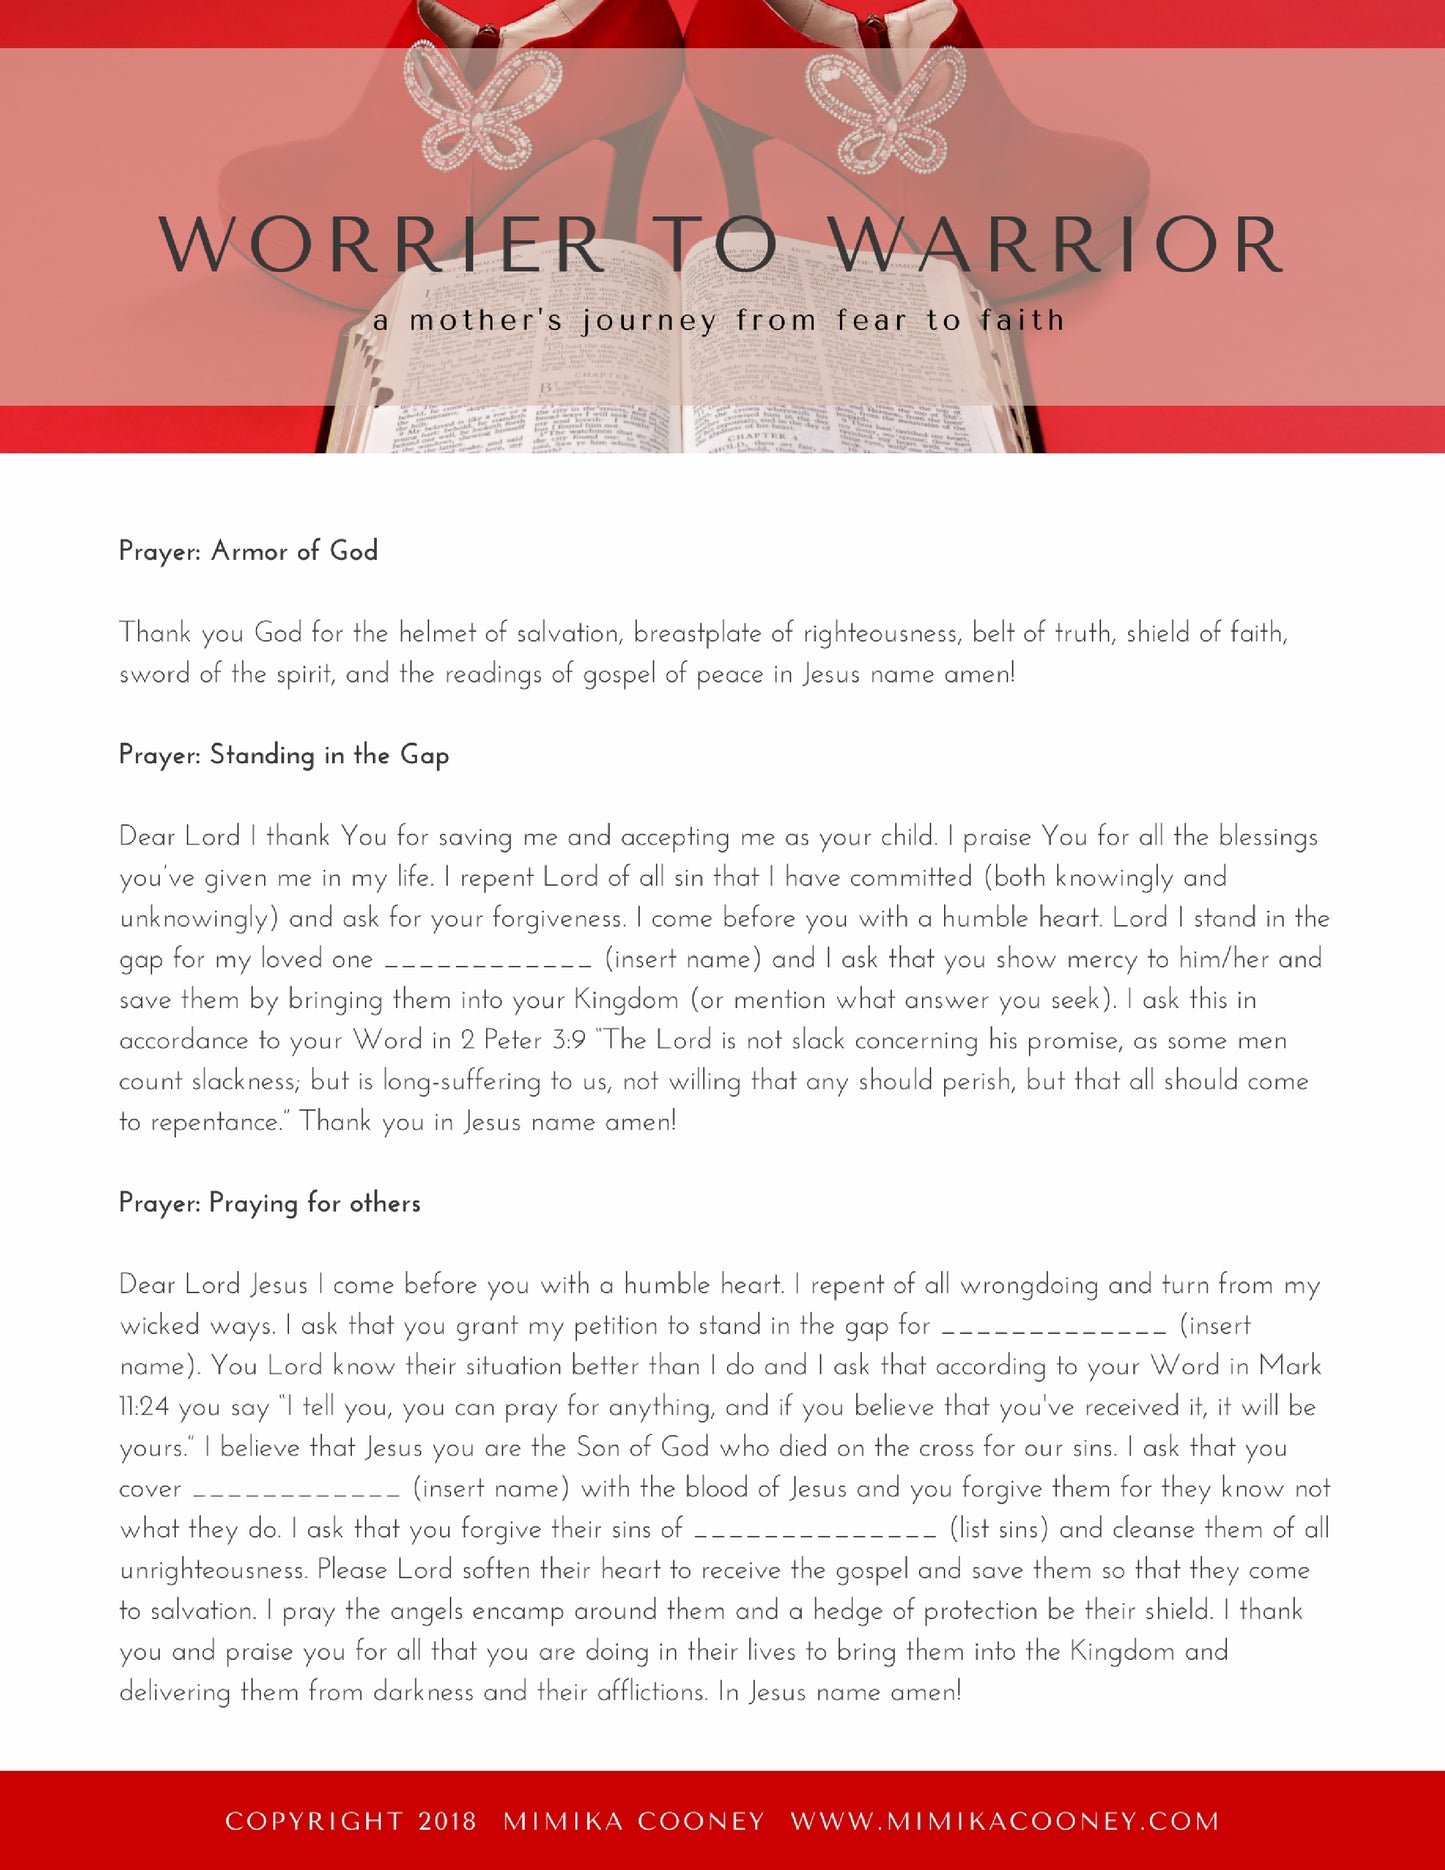 Activation Prayer Guide Worrier to Warrior Book  (Printable 16 page Guide)